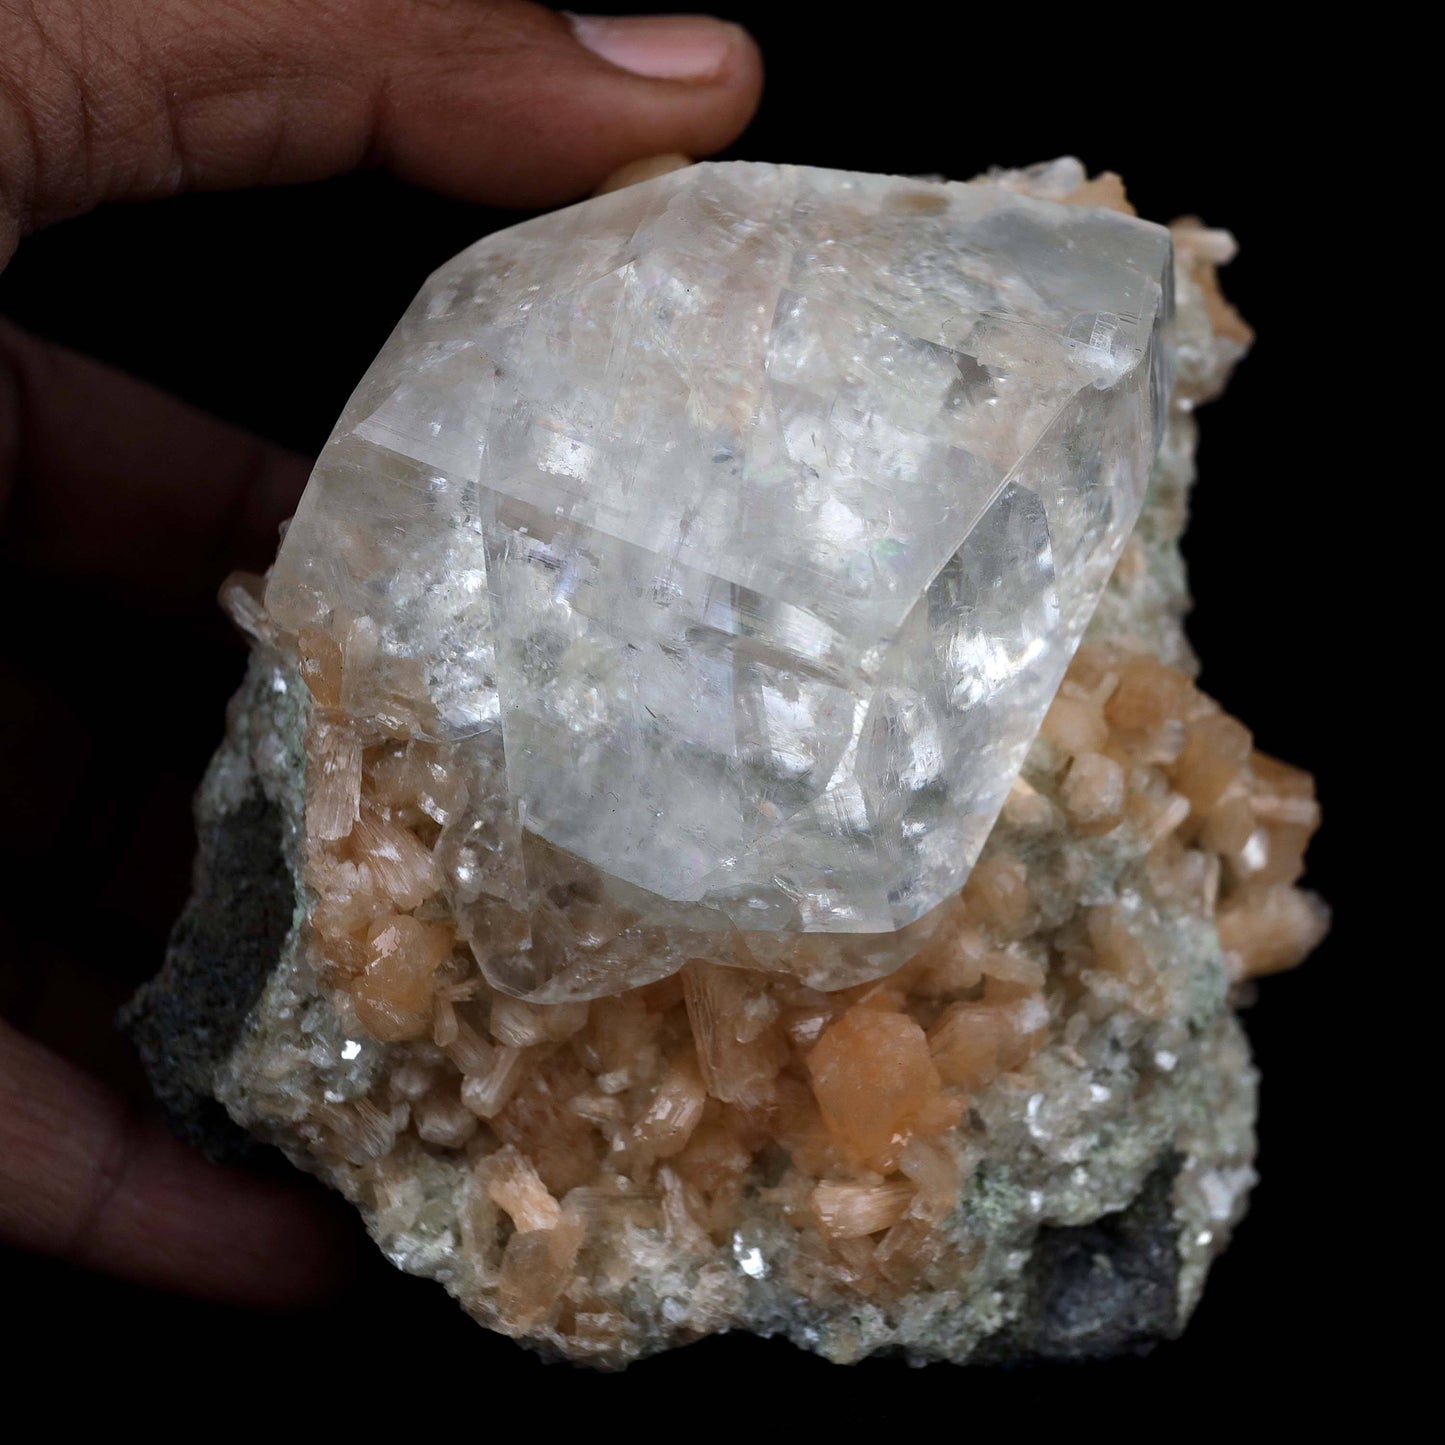 Classic Calcite Cube with Stilbite on Heulandite Natural Mineral Speci…  https://www.superbminerals.us/products/classic-calcite-cube-with-stilbite-on-heulandite-natural-mineral-specimen-b-4379  Features:A showy and three-dimensional display specimen from the famous Deccan Trap featuring rhombic, translucent, white colorless Calcite crystal aesthetically sitting along the side of a 2.0 cm, white "sheaf"-like group of vitreous Stilbite sitting on grey-blue colored Heulandite atop basalt matrix. No damage